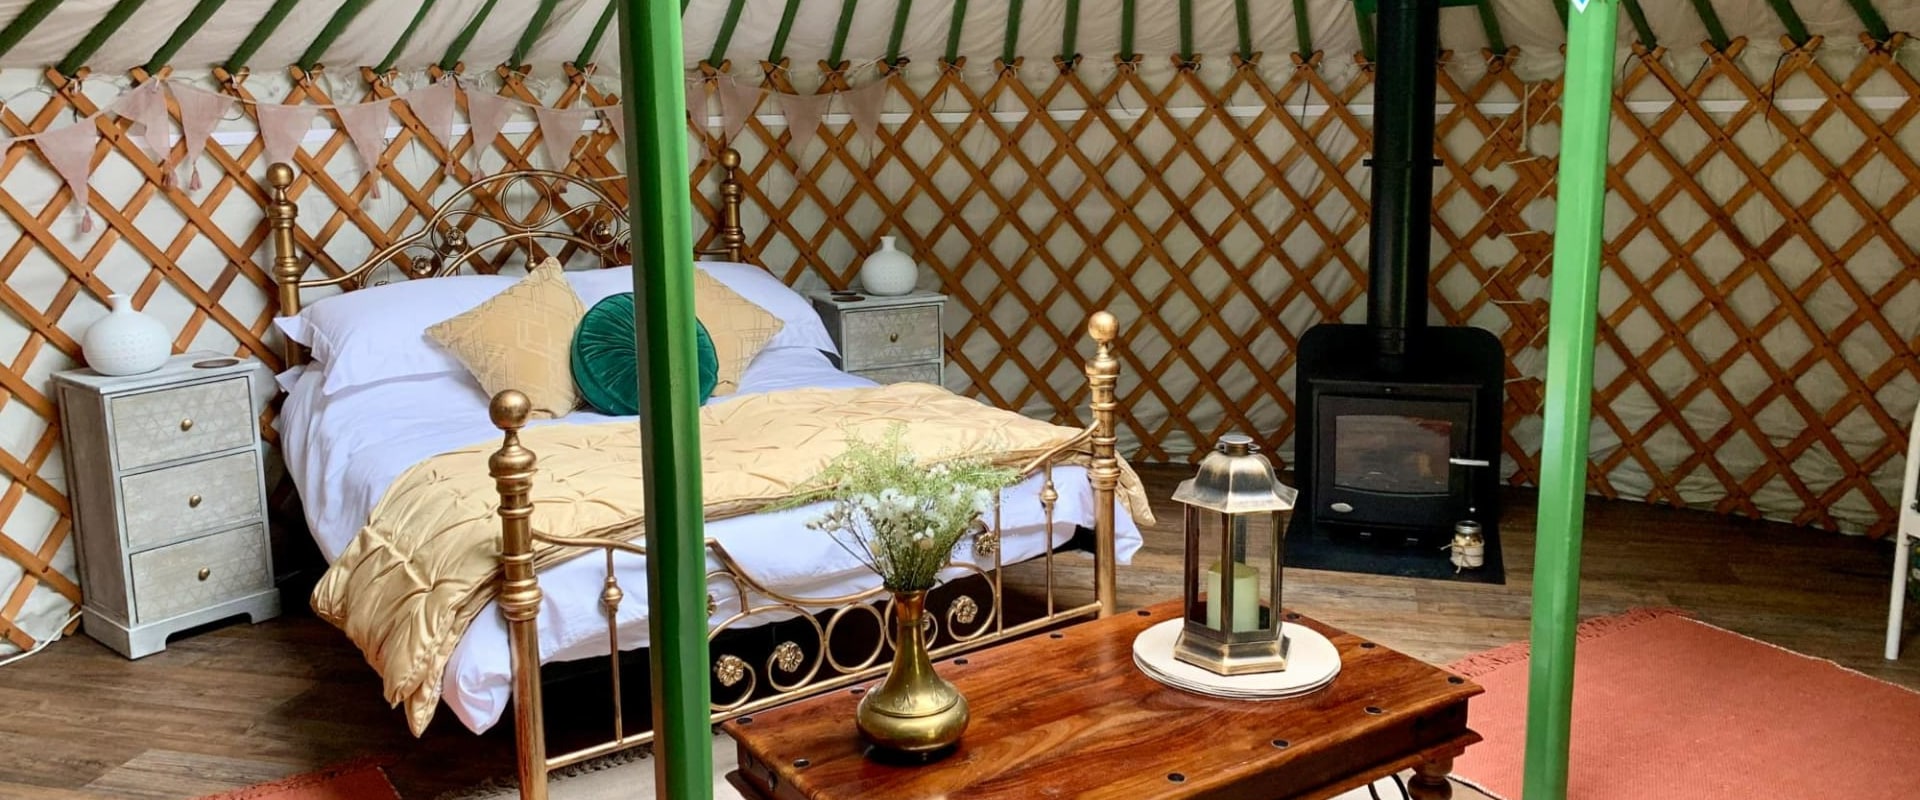 The Best Glamping Sites to Stay in Hertfordshire